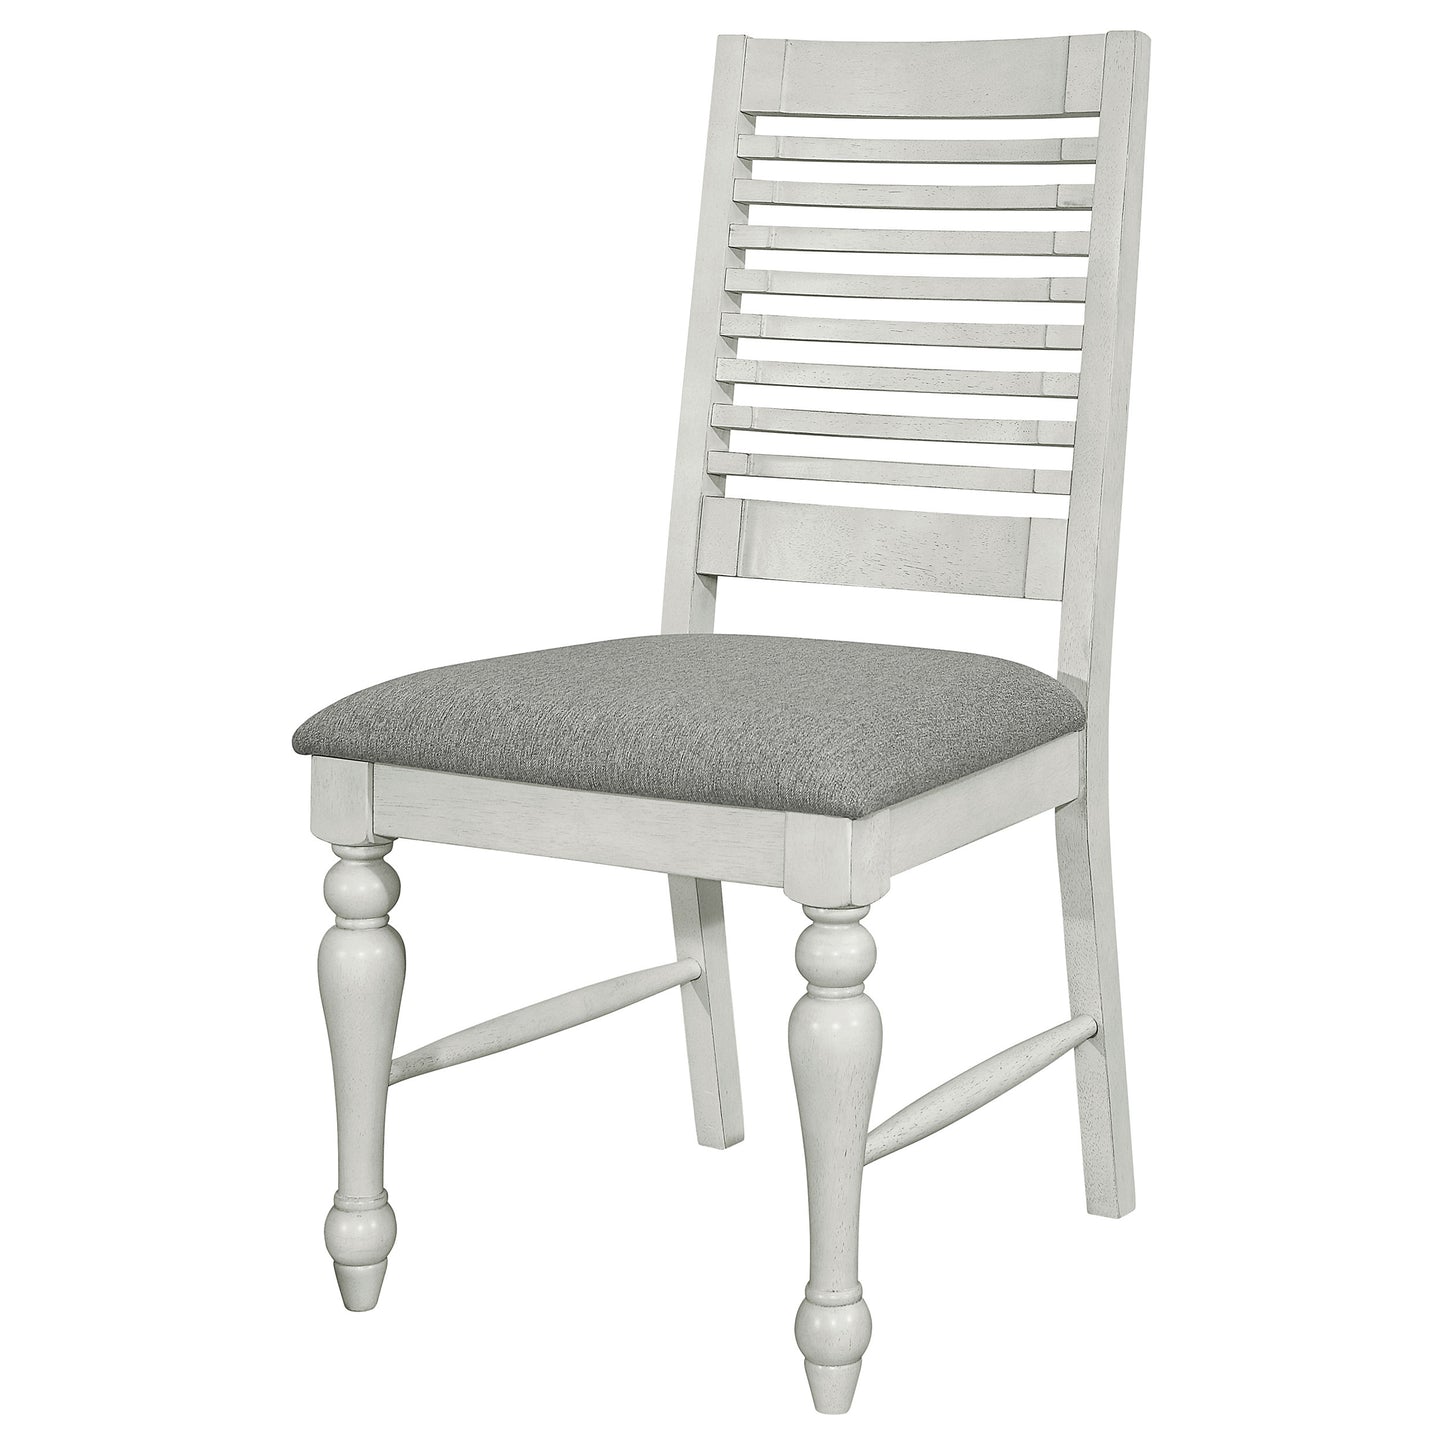 Aventine Ladder Back Dining Side Chair with Upholstered Seat Vintage Chalk and Grey (Set of 2)